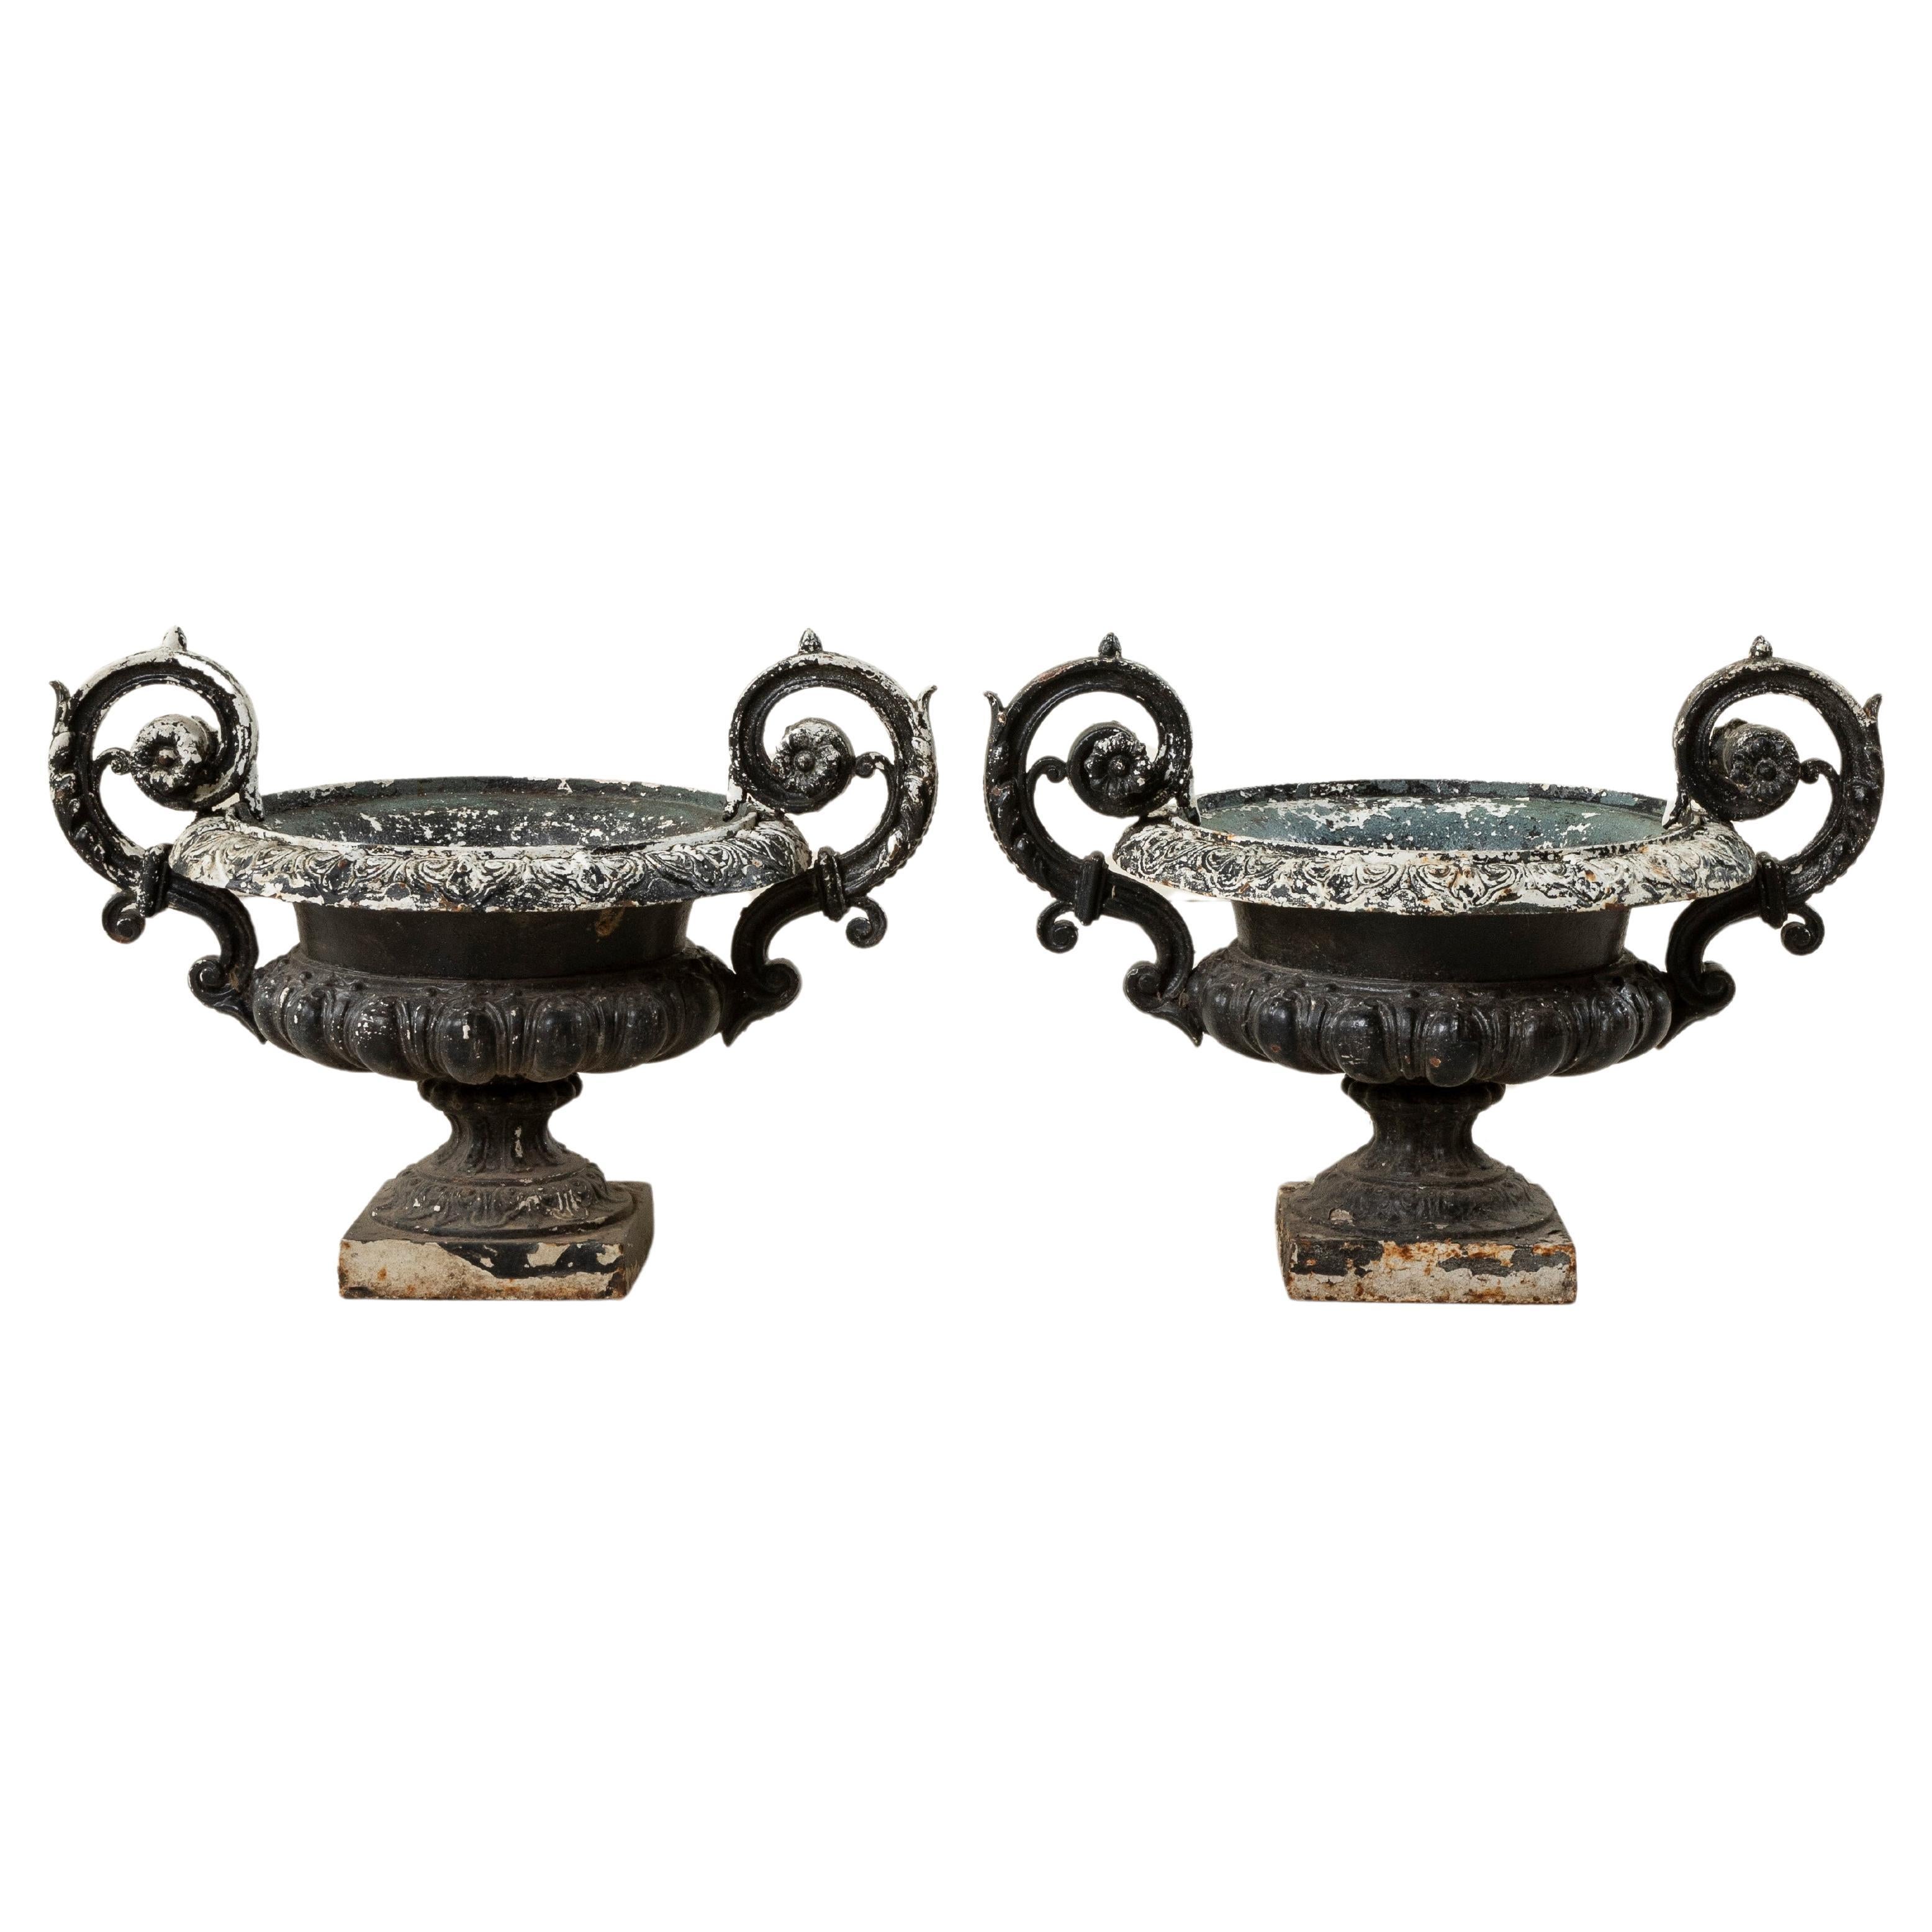 Pair of Large Late 19th Century French Cast Iron Jardinieres, Urns, Planters For Sale